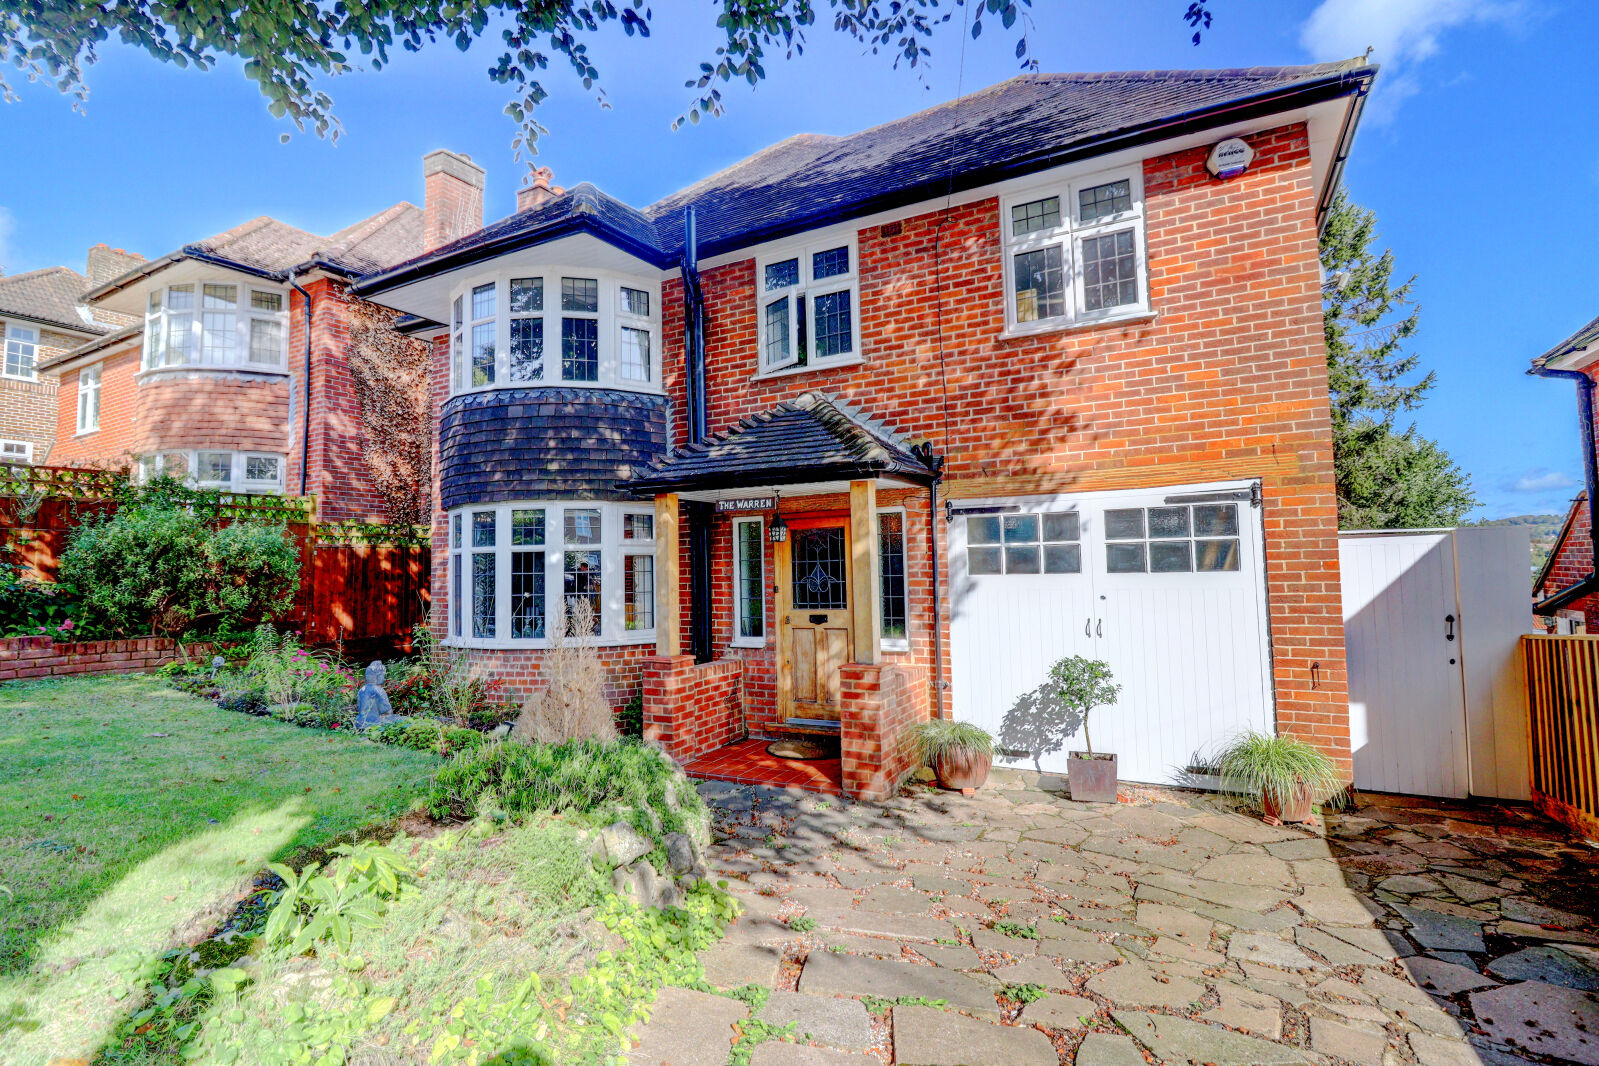 4 bedroom detached house for sale Colville Road, High Wycombe, HP11, main image